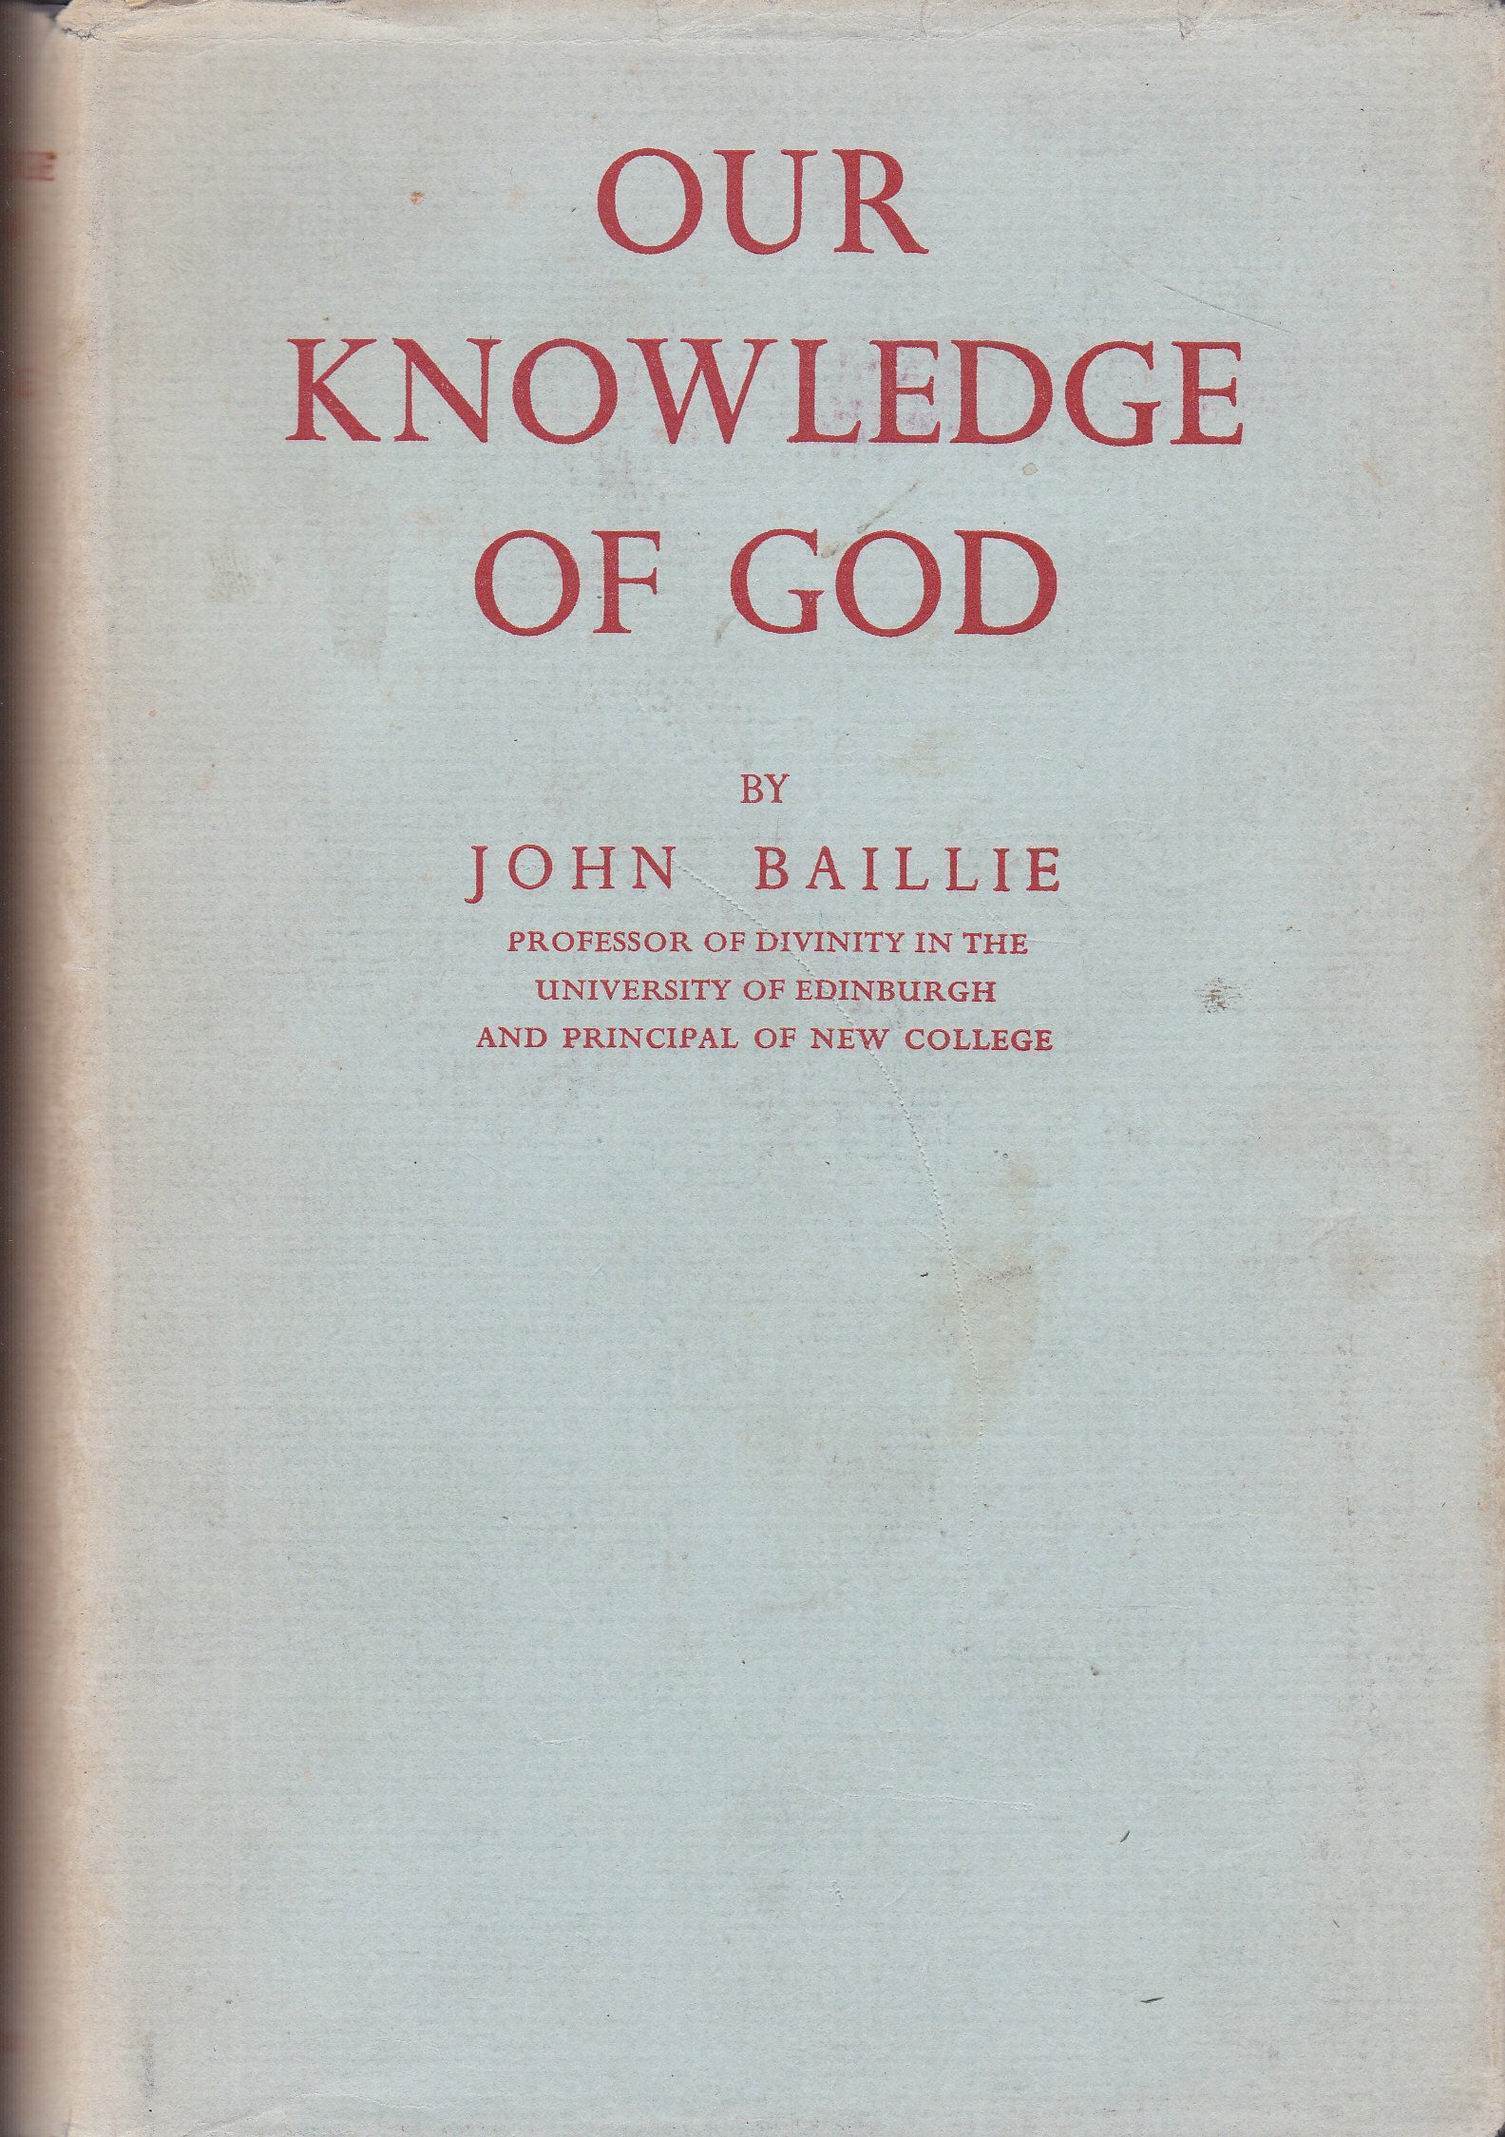 Our Knowledge of God